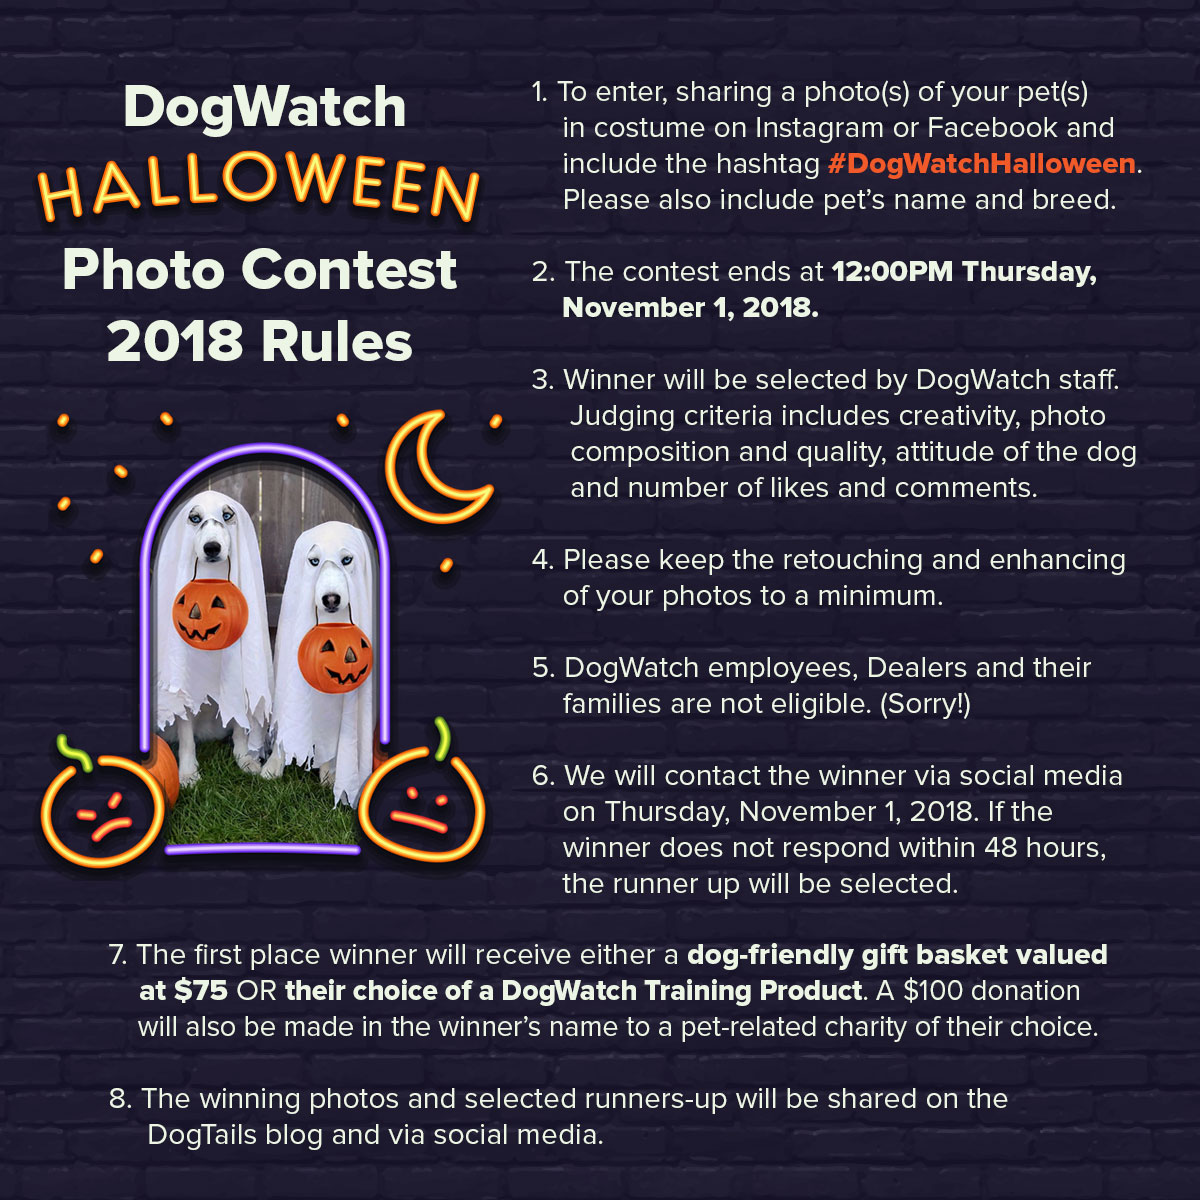 DogWatch Halloween Photo Contest Rules 2018